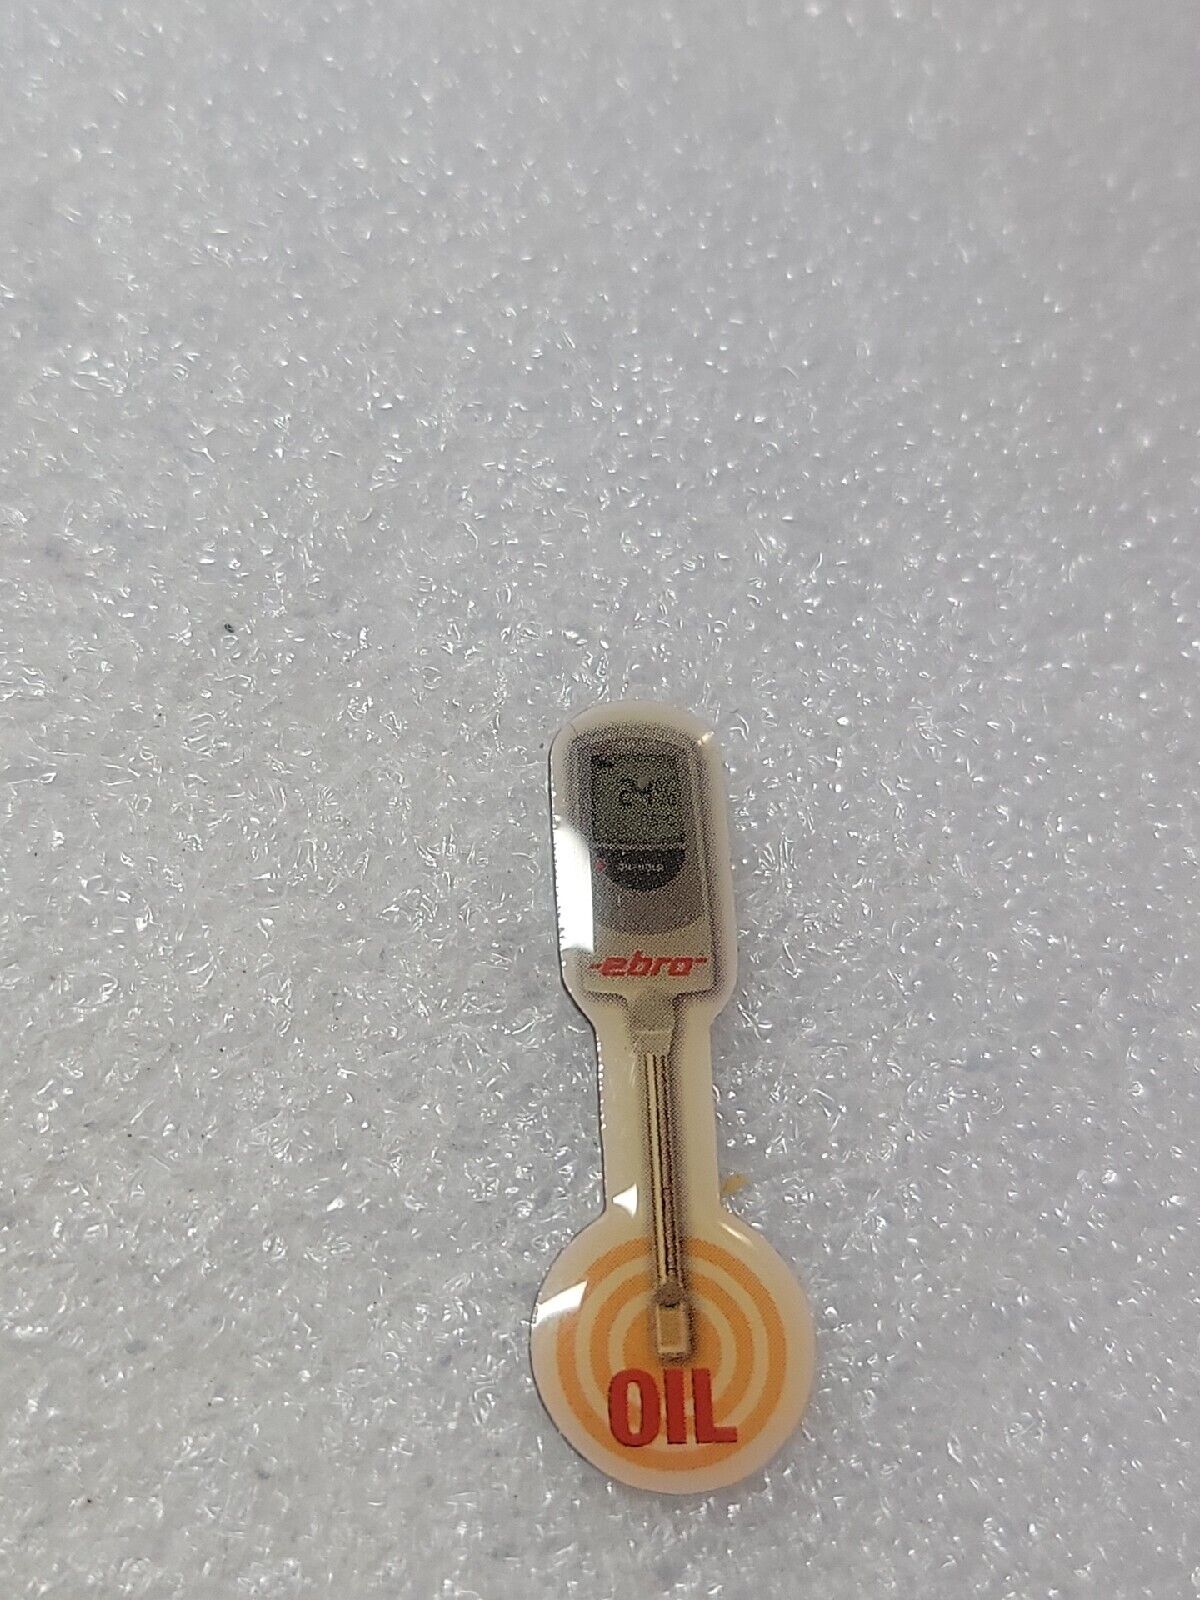 Vintage Erbo Thermometer Enamel Lapel Pin Oil Single Post Clutch Back Color